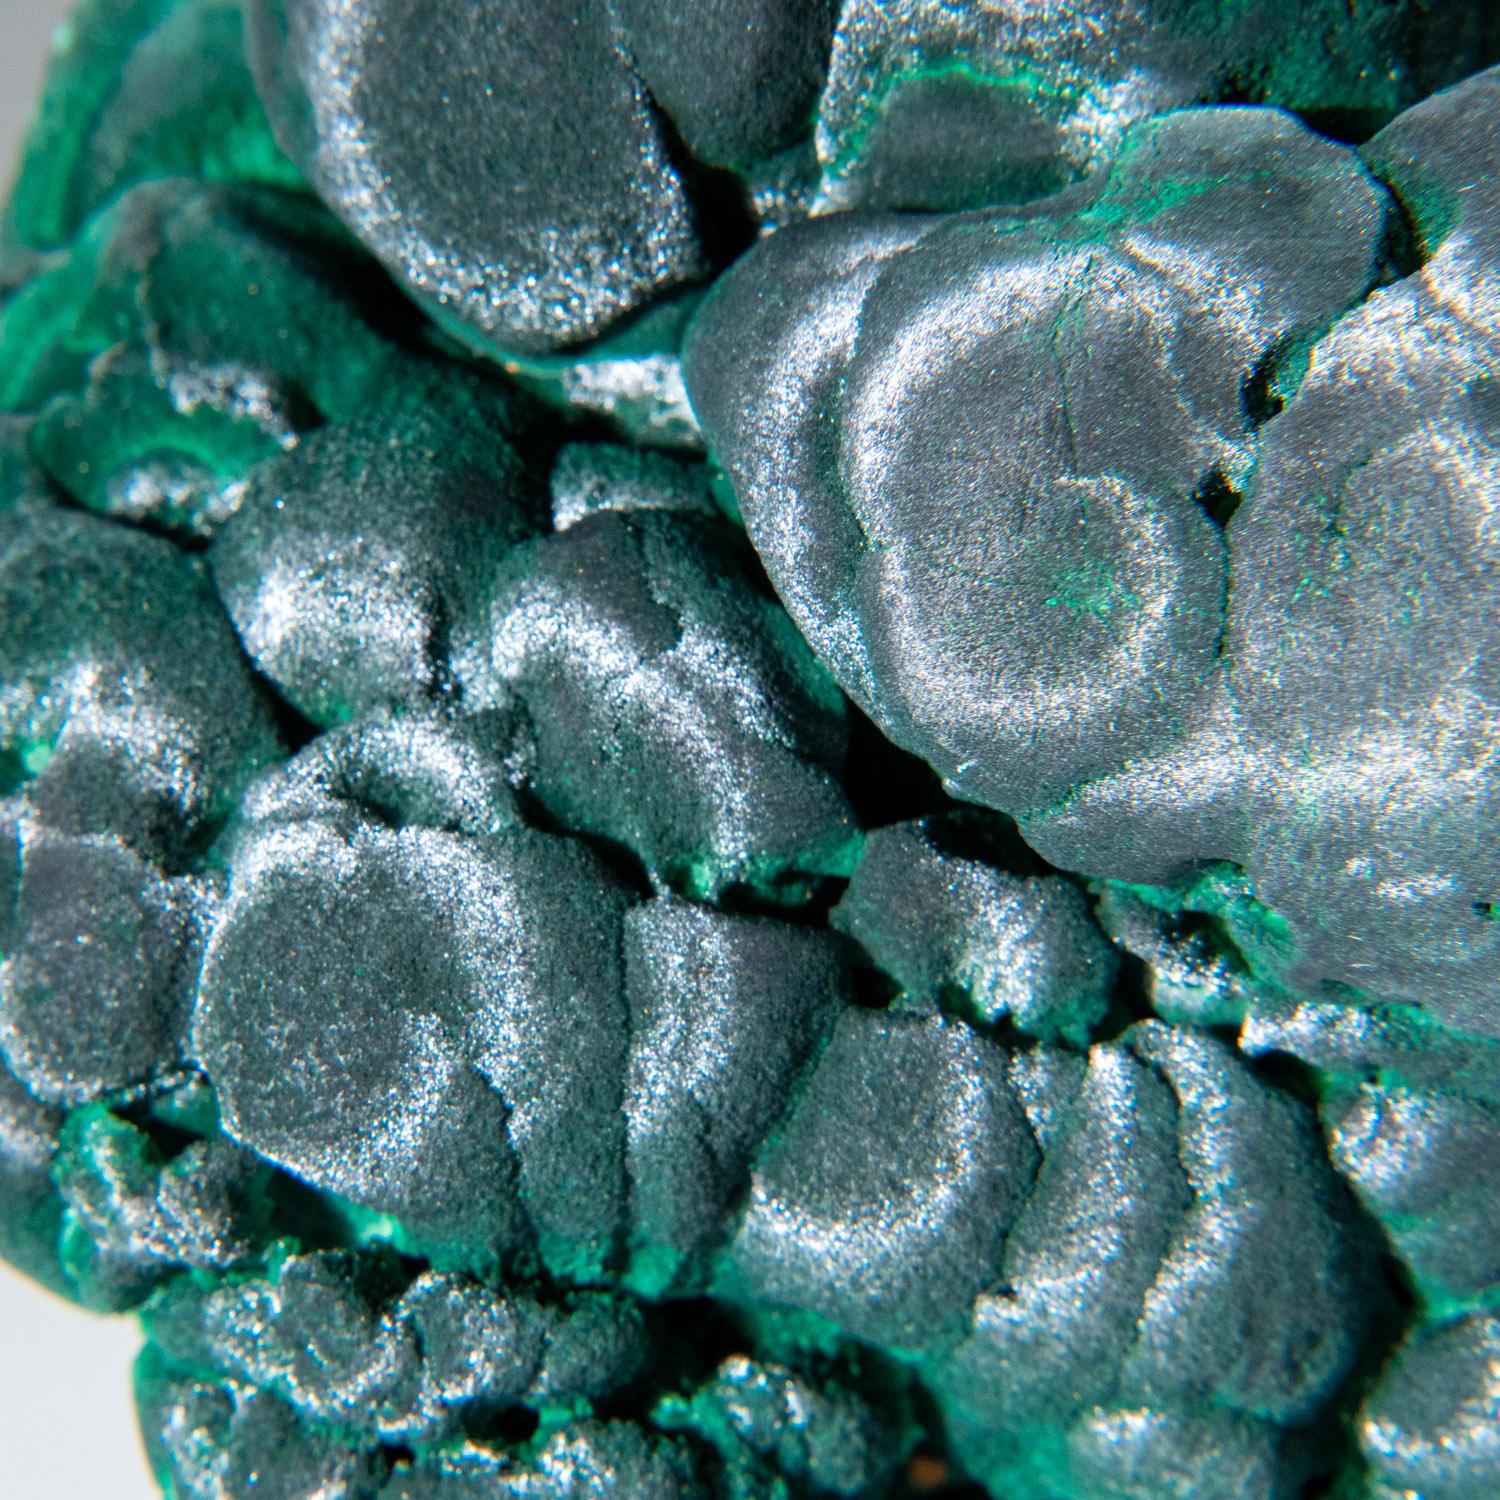 From Shaba Copper Belt, Katanga (Shaba) Province, Democratic Republic of the Congo (Zaire)

A sculptural velvet botryoidal formation of solid velvety green malachite from the famous copper mines of Shaba. Beautiful lustrous even green color all